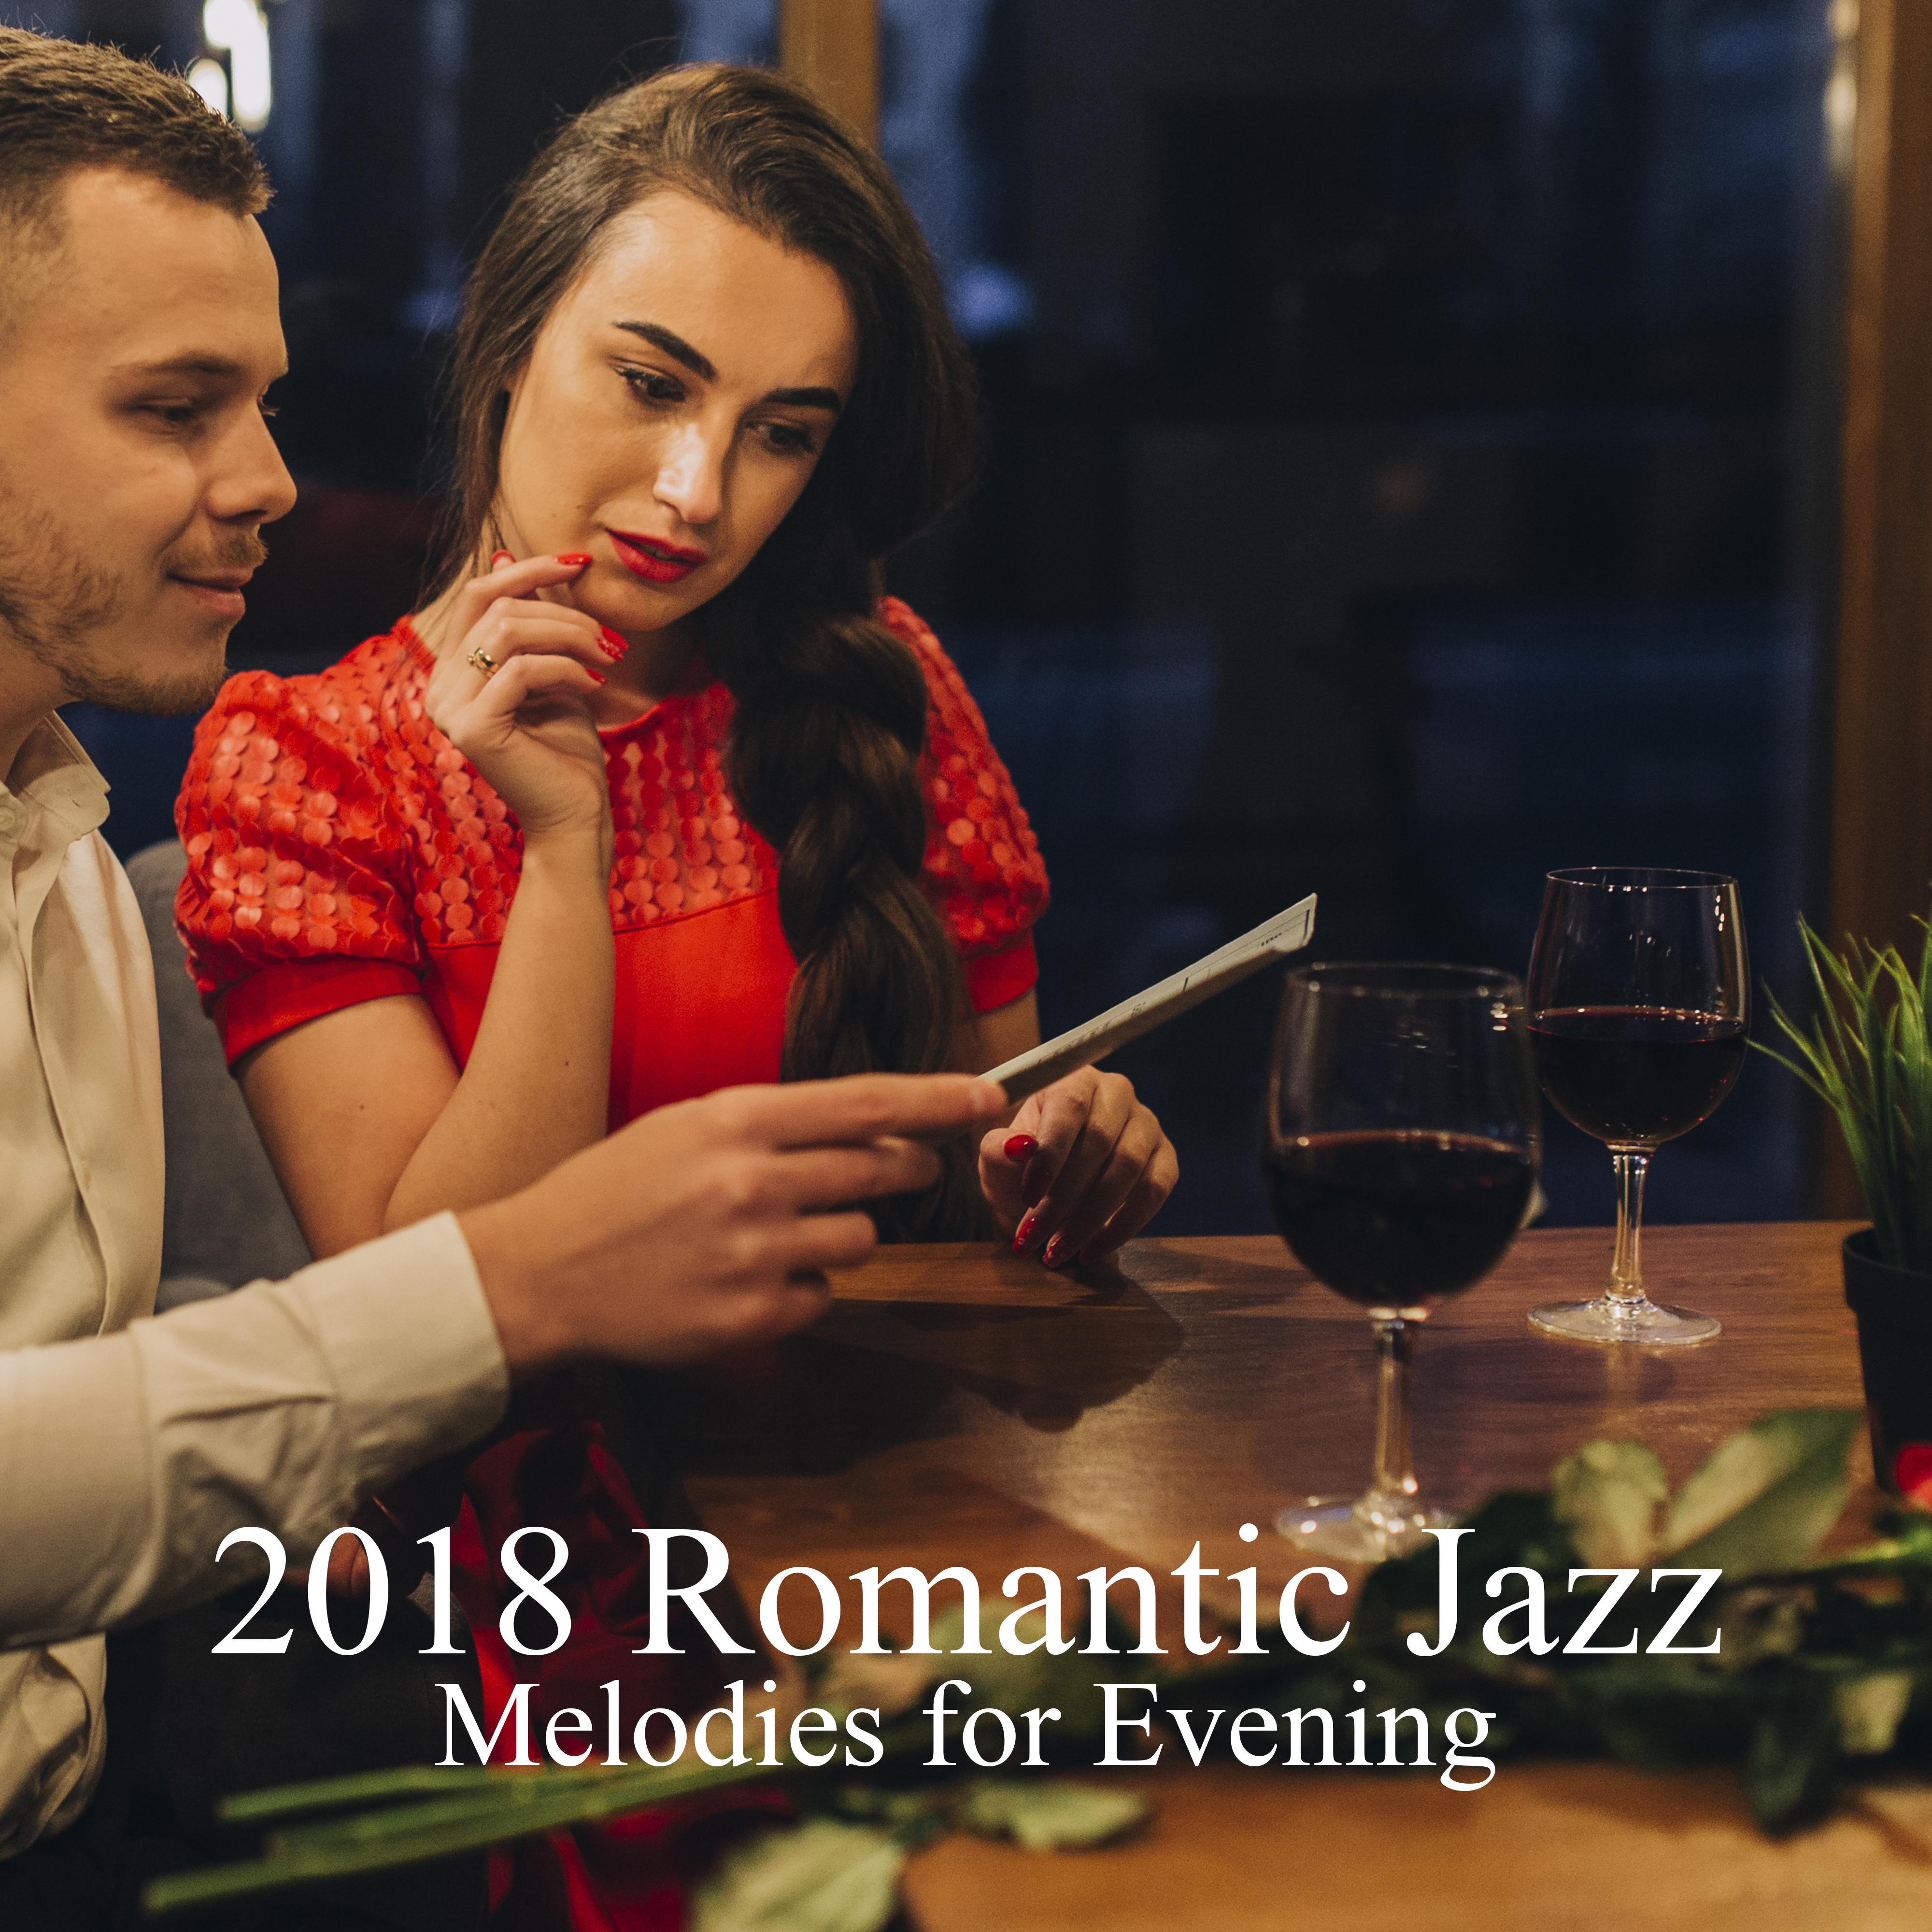 2018 Romantic Jazz Melodies for Evening